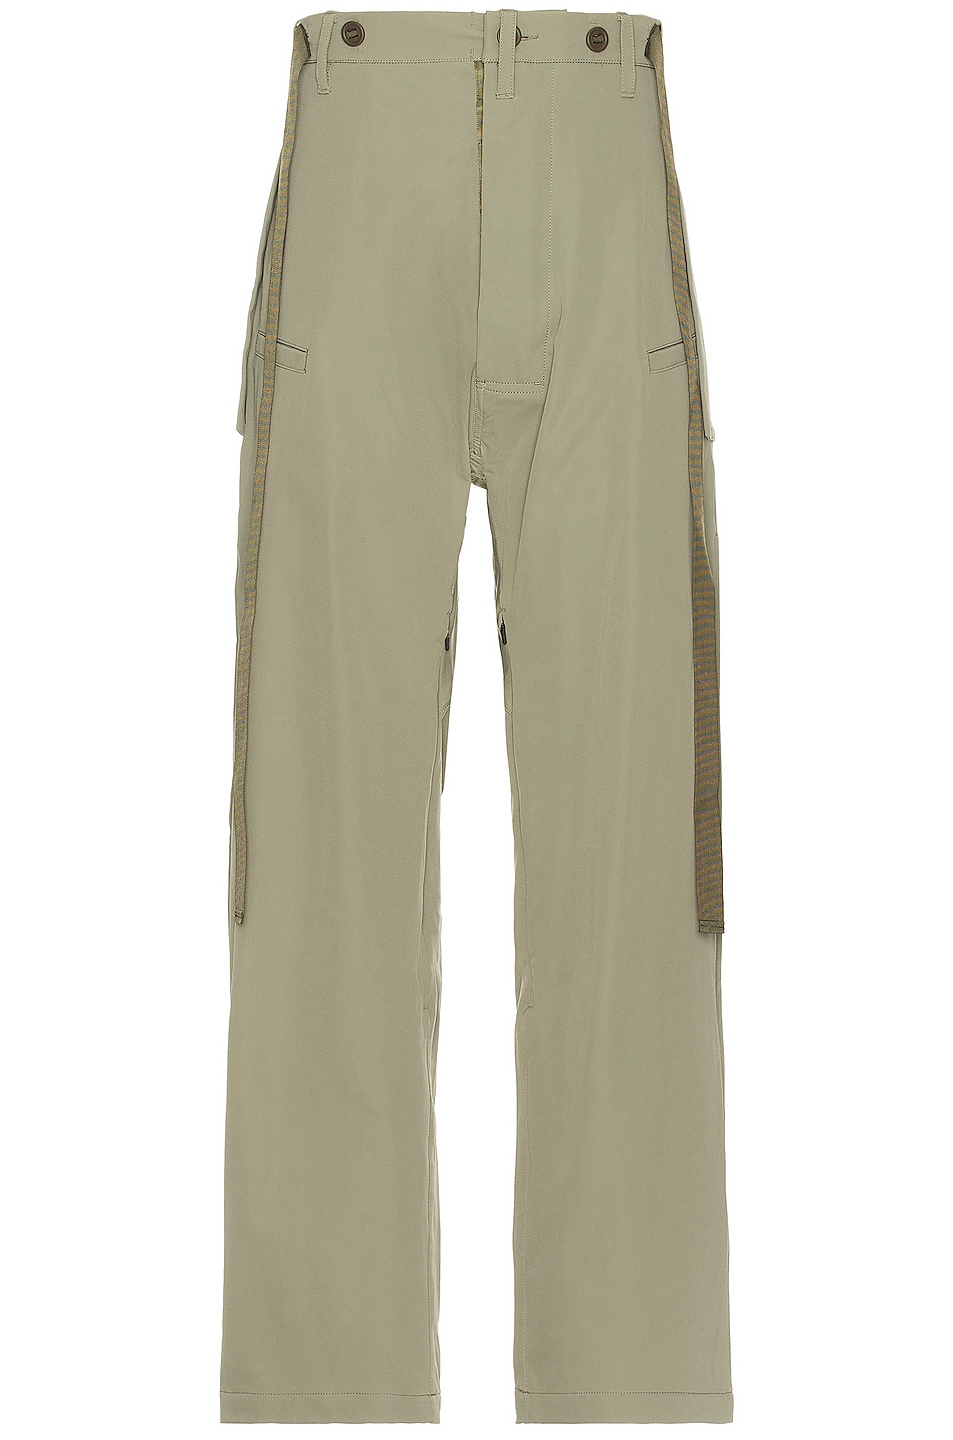 Image 1 of Acronym P46-ds Schoeller Dryskin Vent Pant in Alpha Green